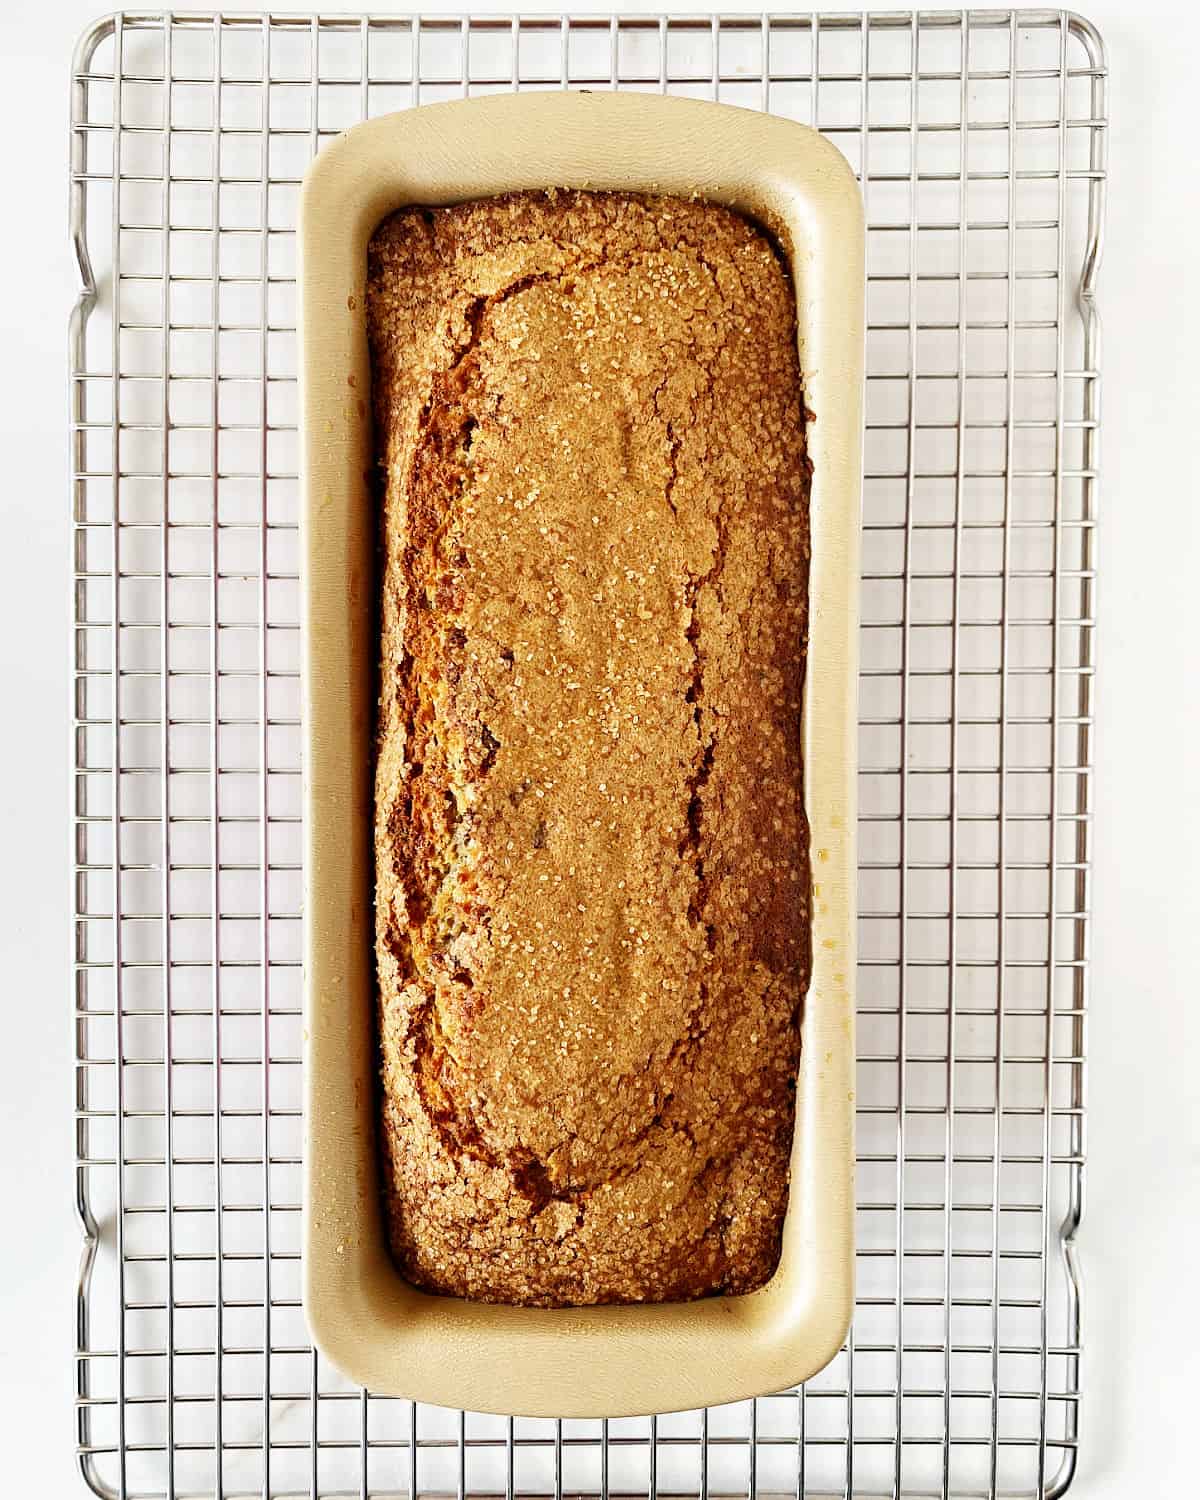 Baked banana bread in a golden loaf pan on a wire rack.